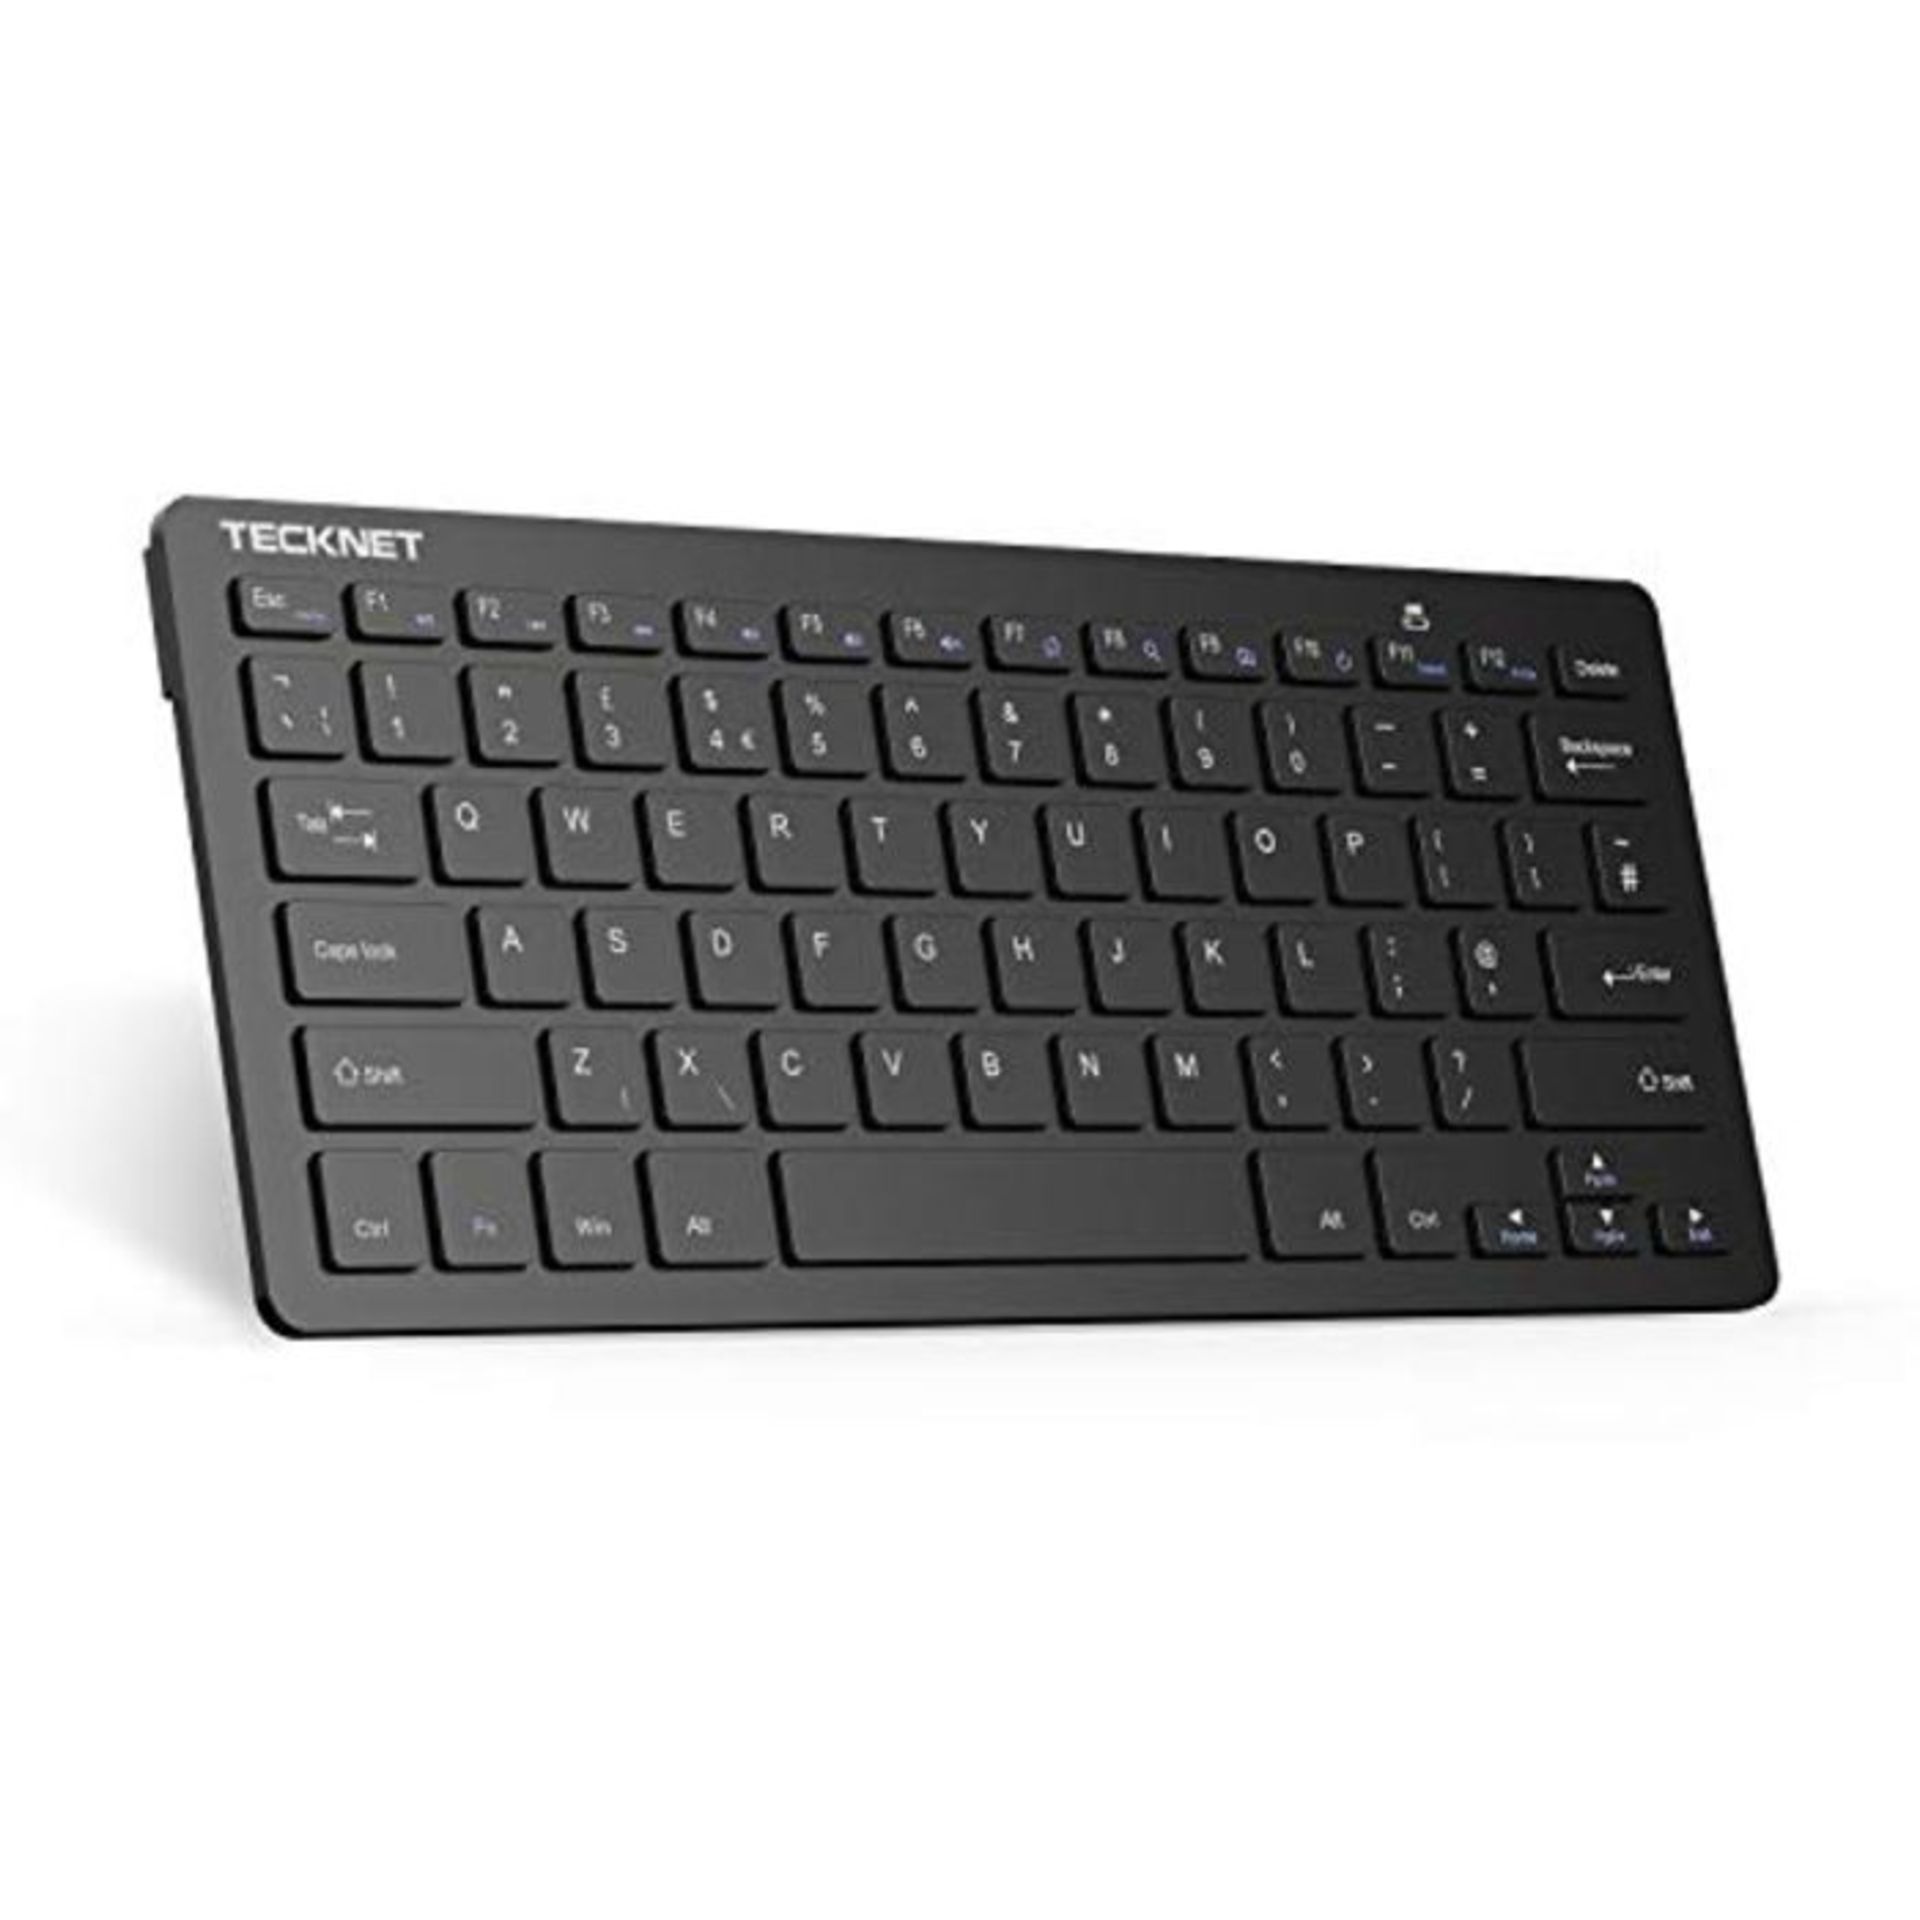 [INCOMPLETE] TECKNET 2.4G Wireless Keyboard For Windows 10/8/7/Vista/XP and Android Sm